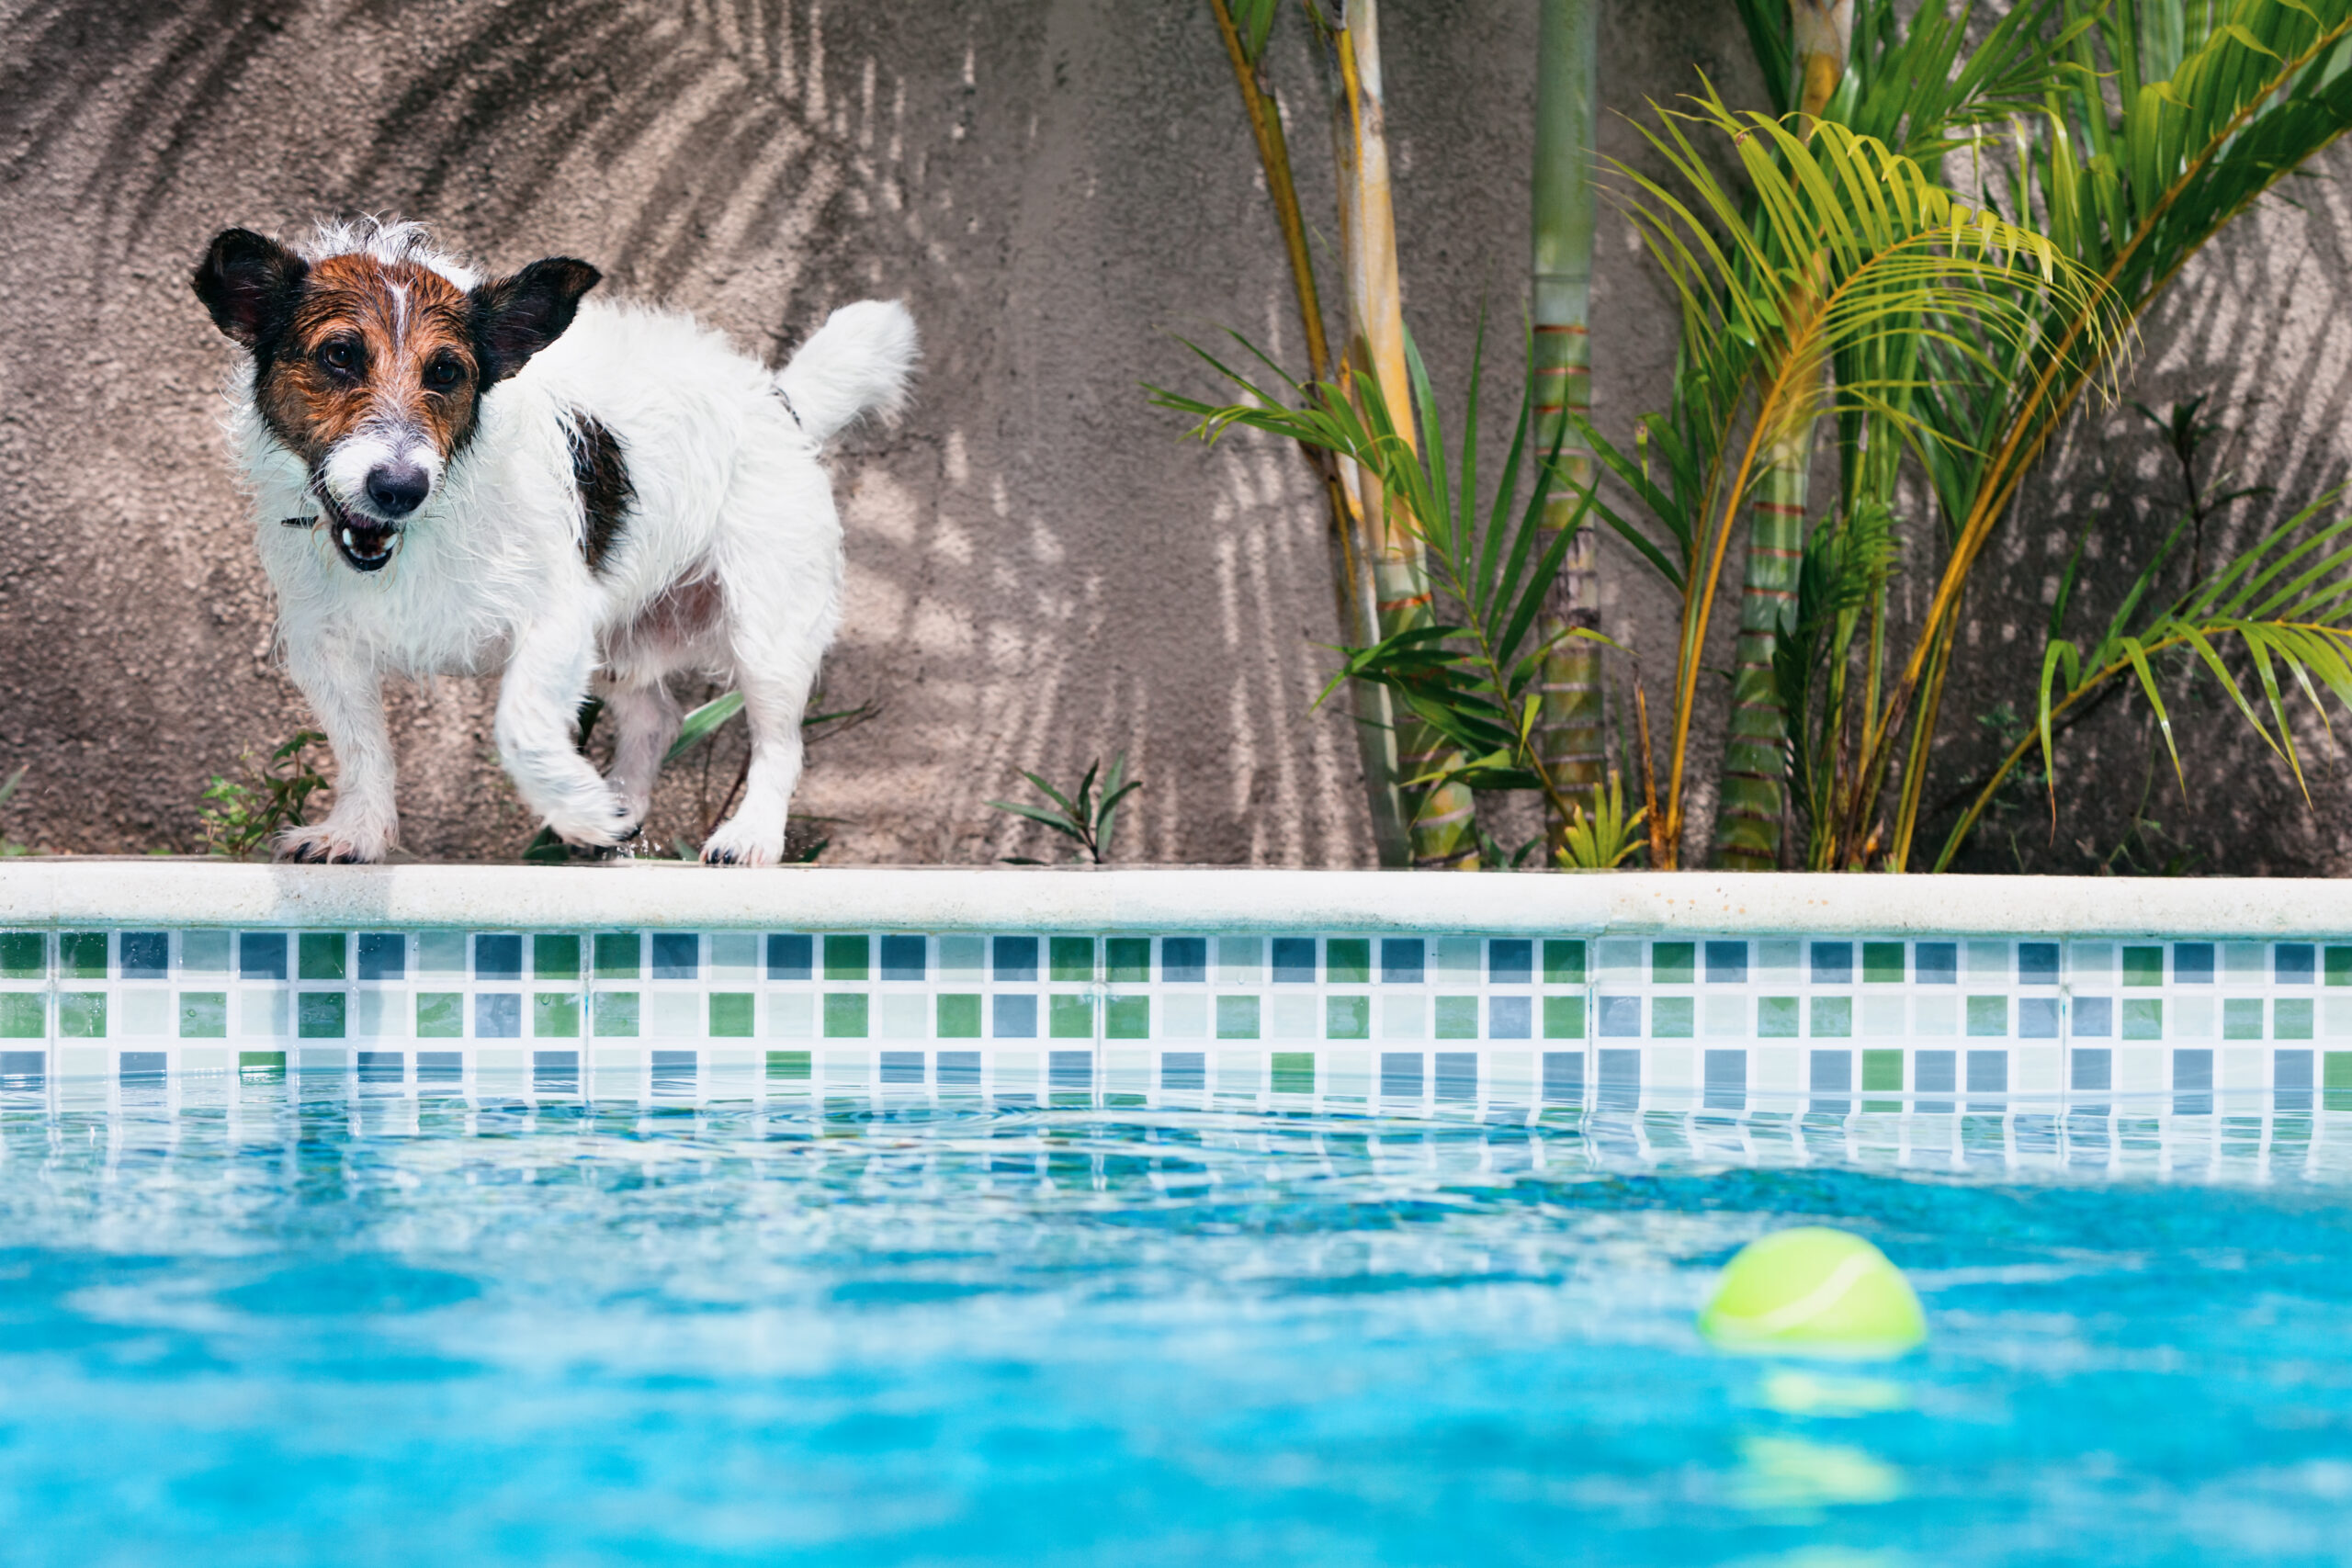 Small dog by pool, happy, owner called for dog poop clean up near me